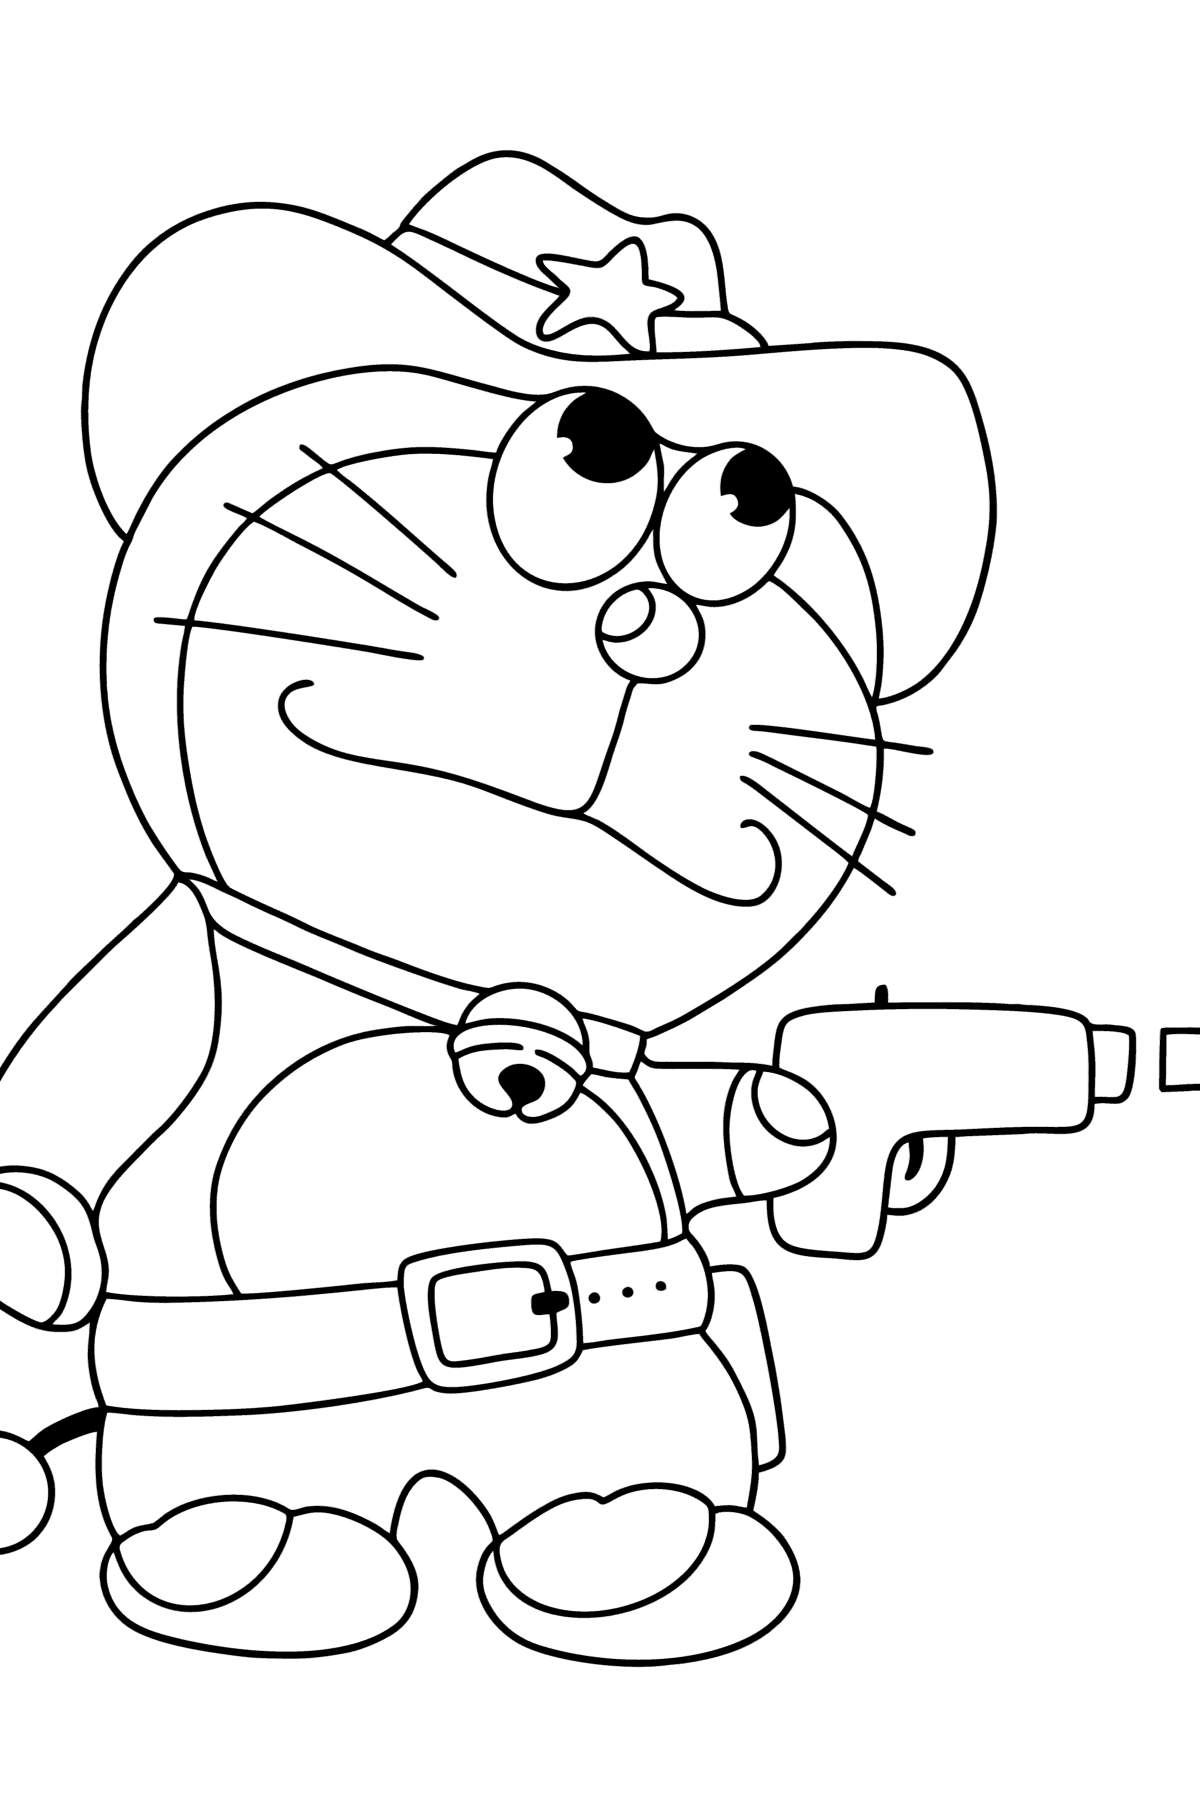 Doraemon Sheriff сoloring page - Coloring Pages for Kids